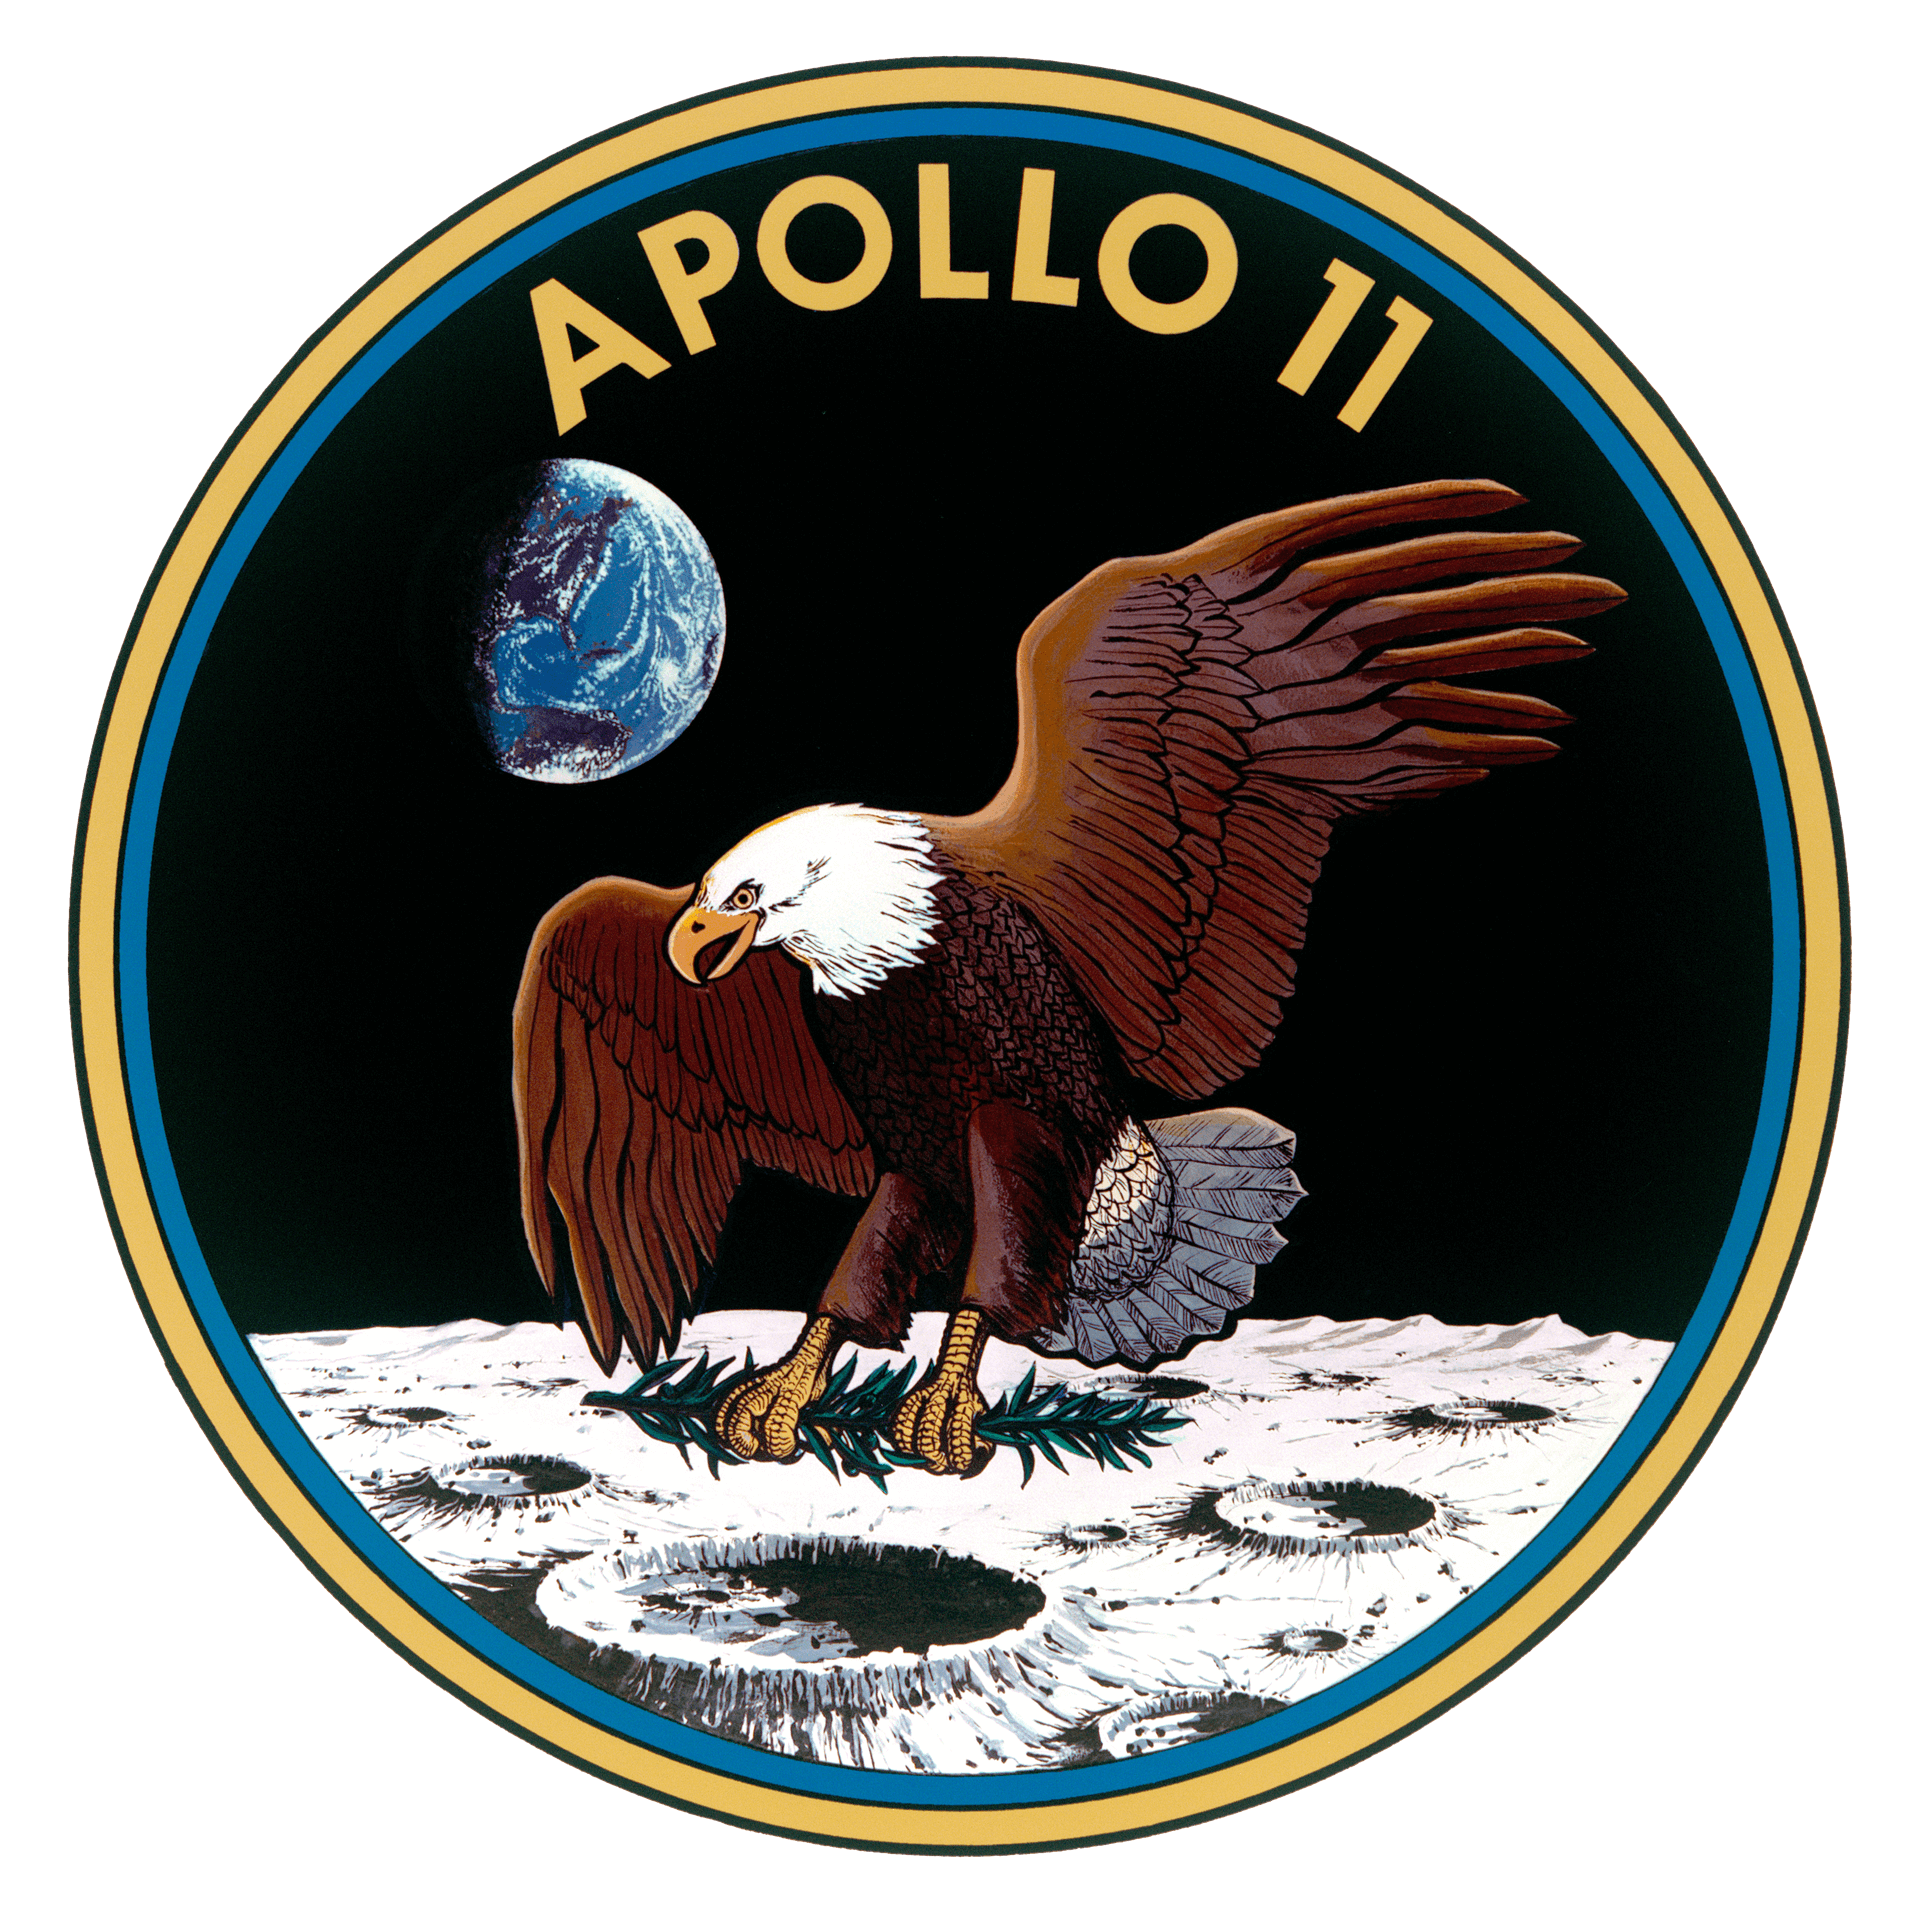 Mission patch for Apollo 11